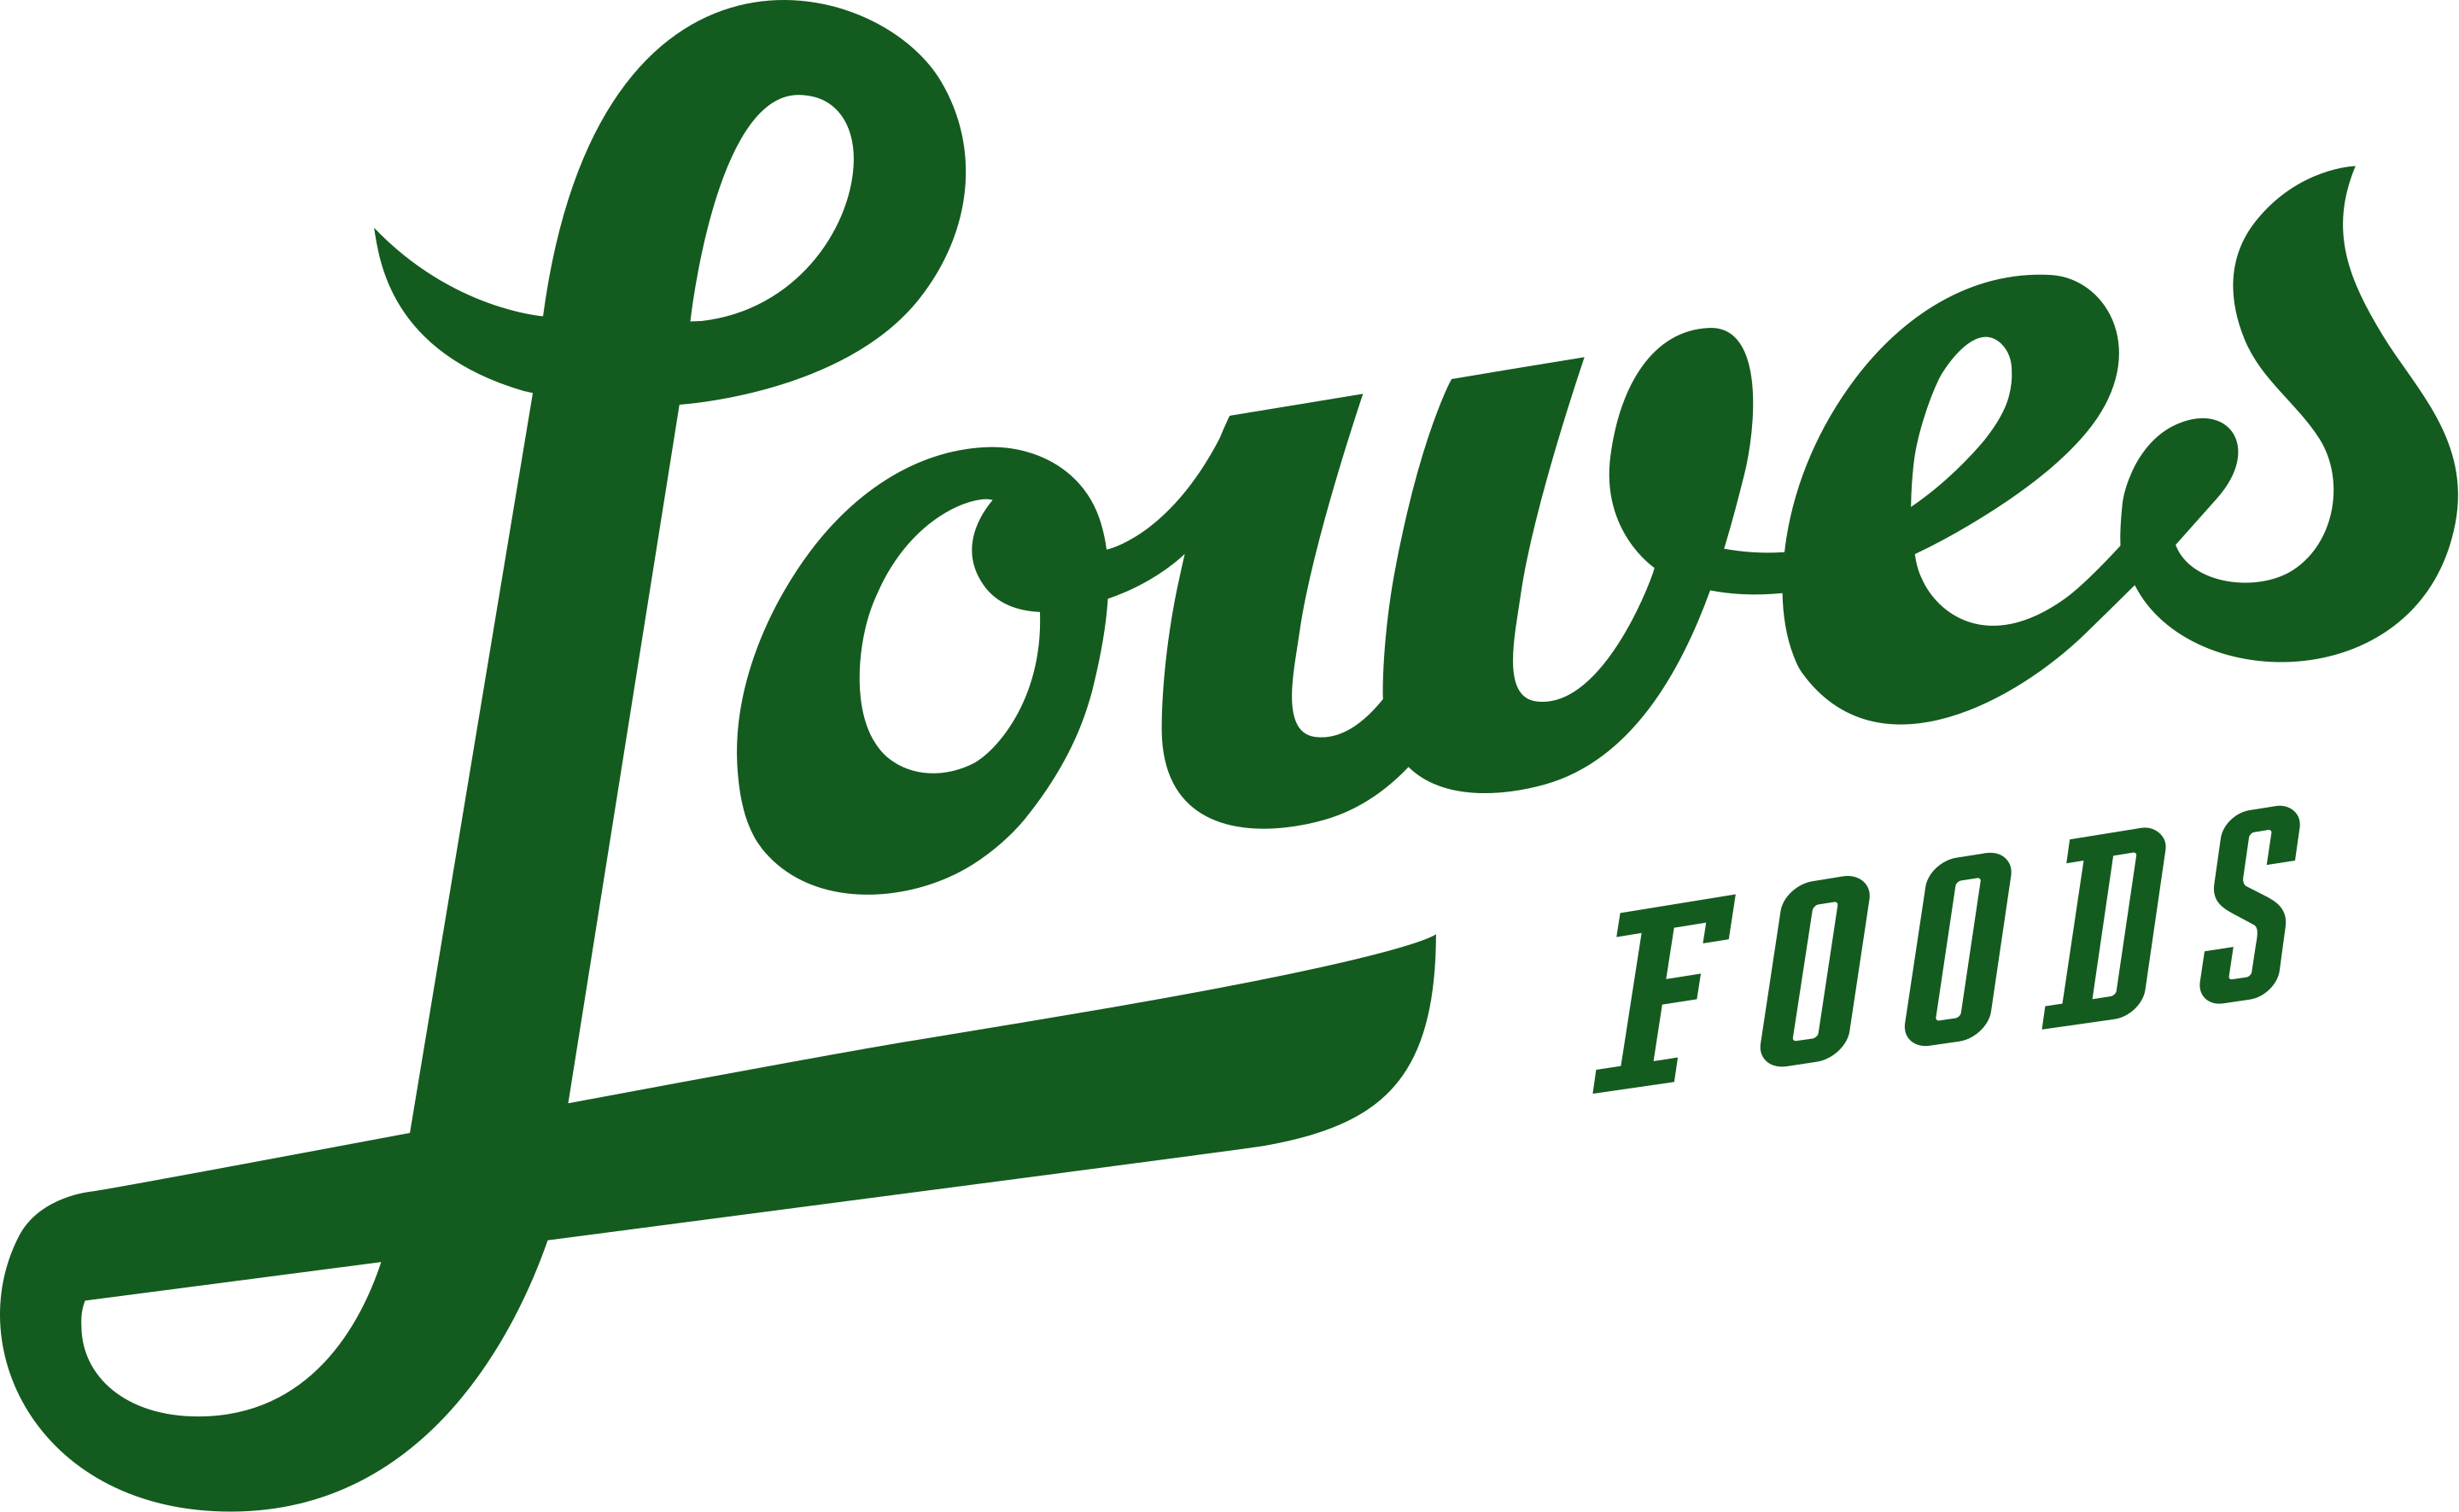 2880px-Lowesfoods.svg